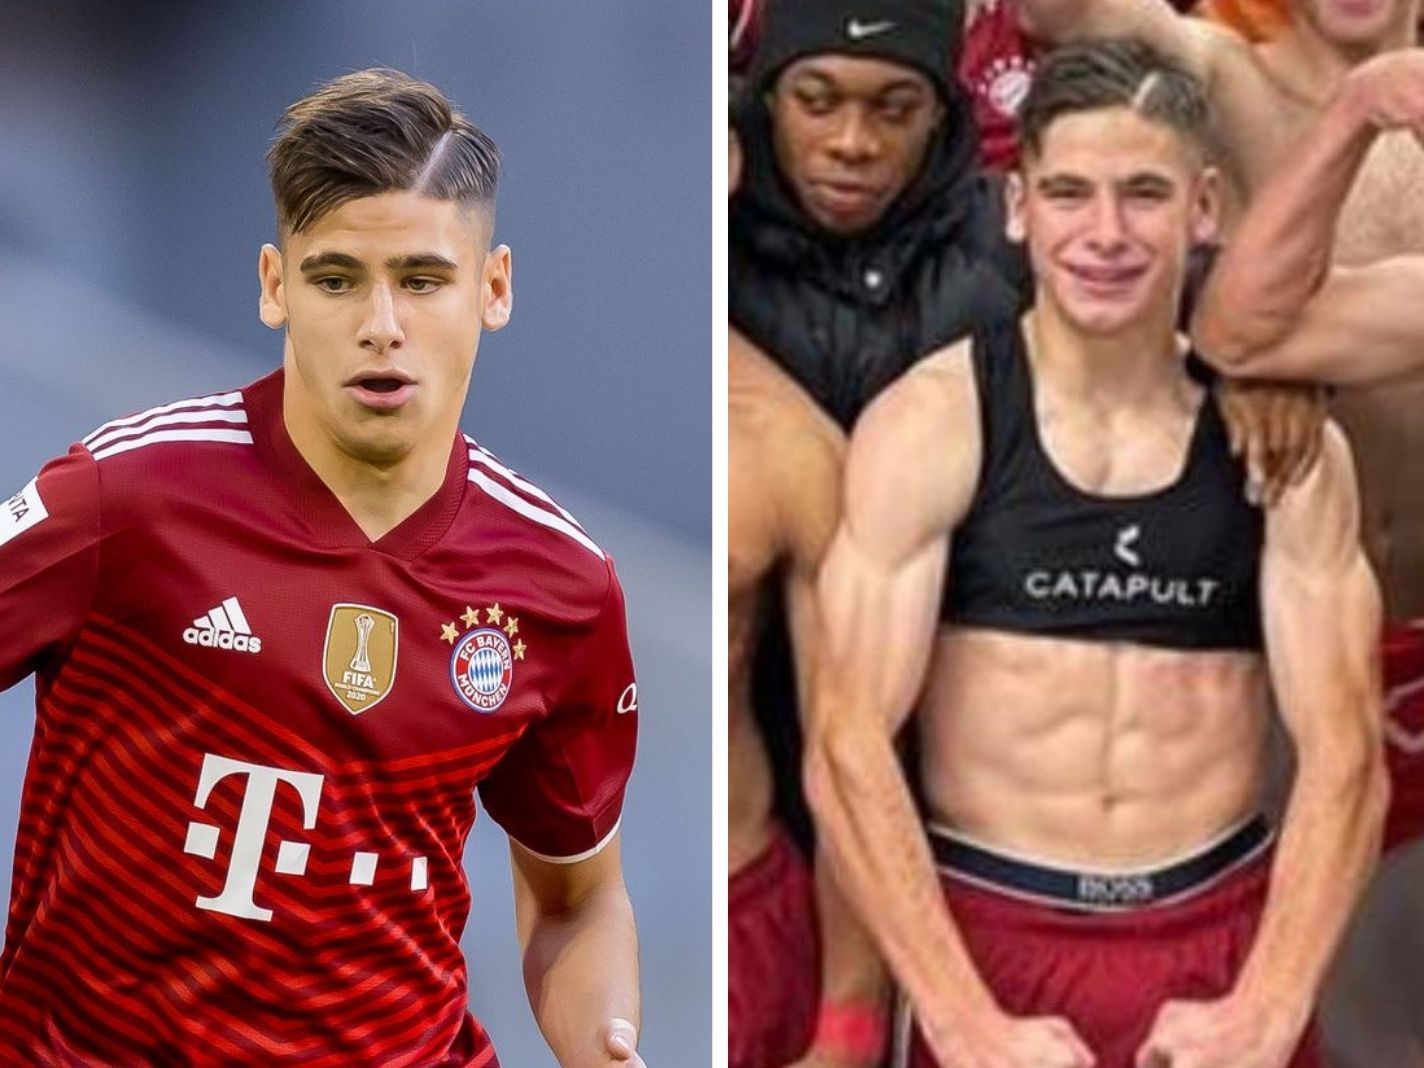 18 y/o Nemanja Motika is the latest Bayern player to get absolutely jacked